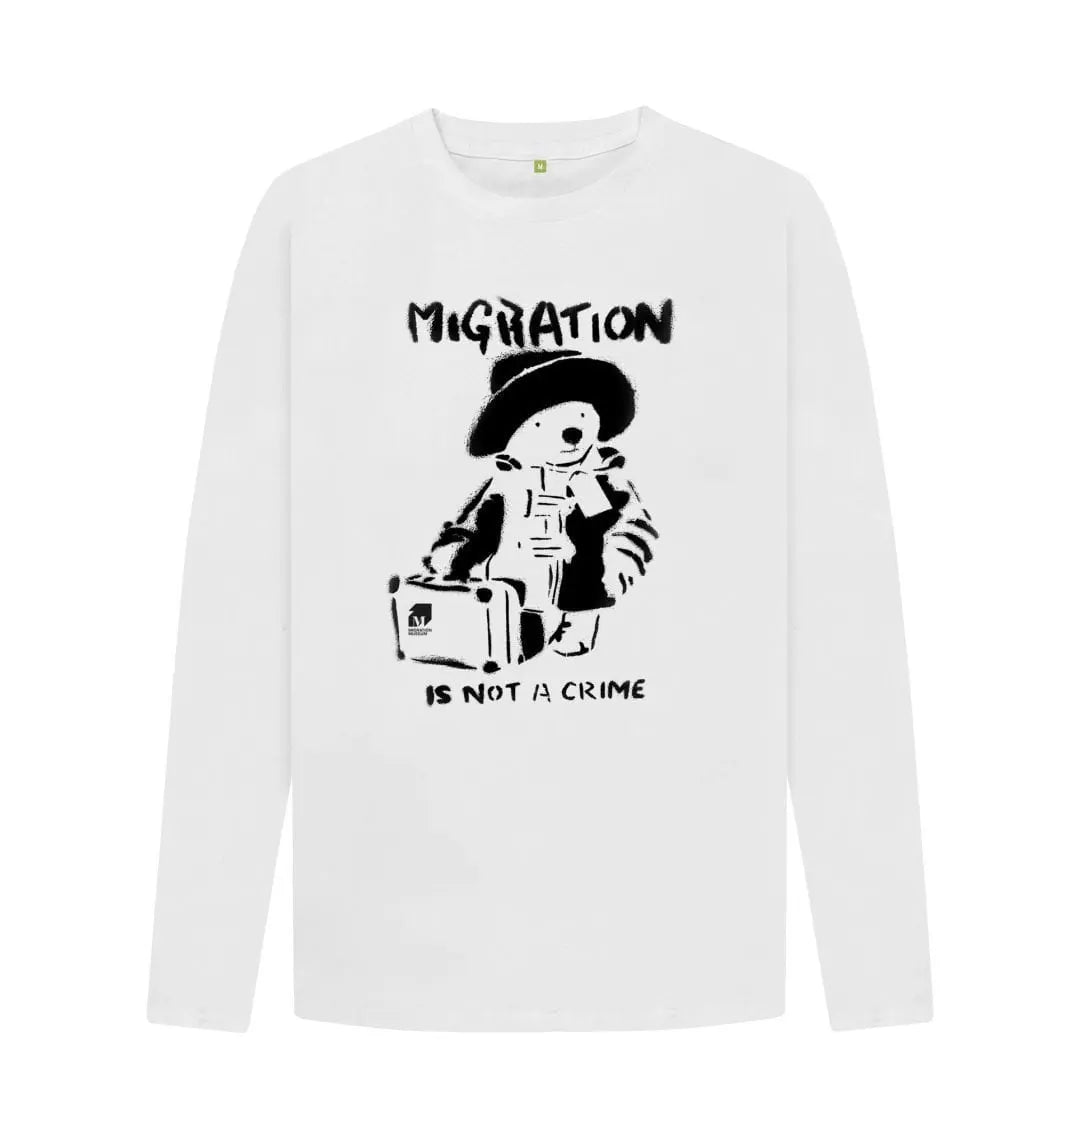 Migration Is Not A Crime - Organic Cotton Unisex Long-Sleeved Tee - Migration Museum Shop